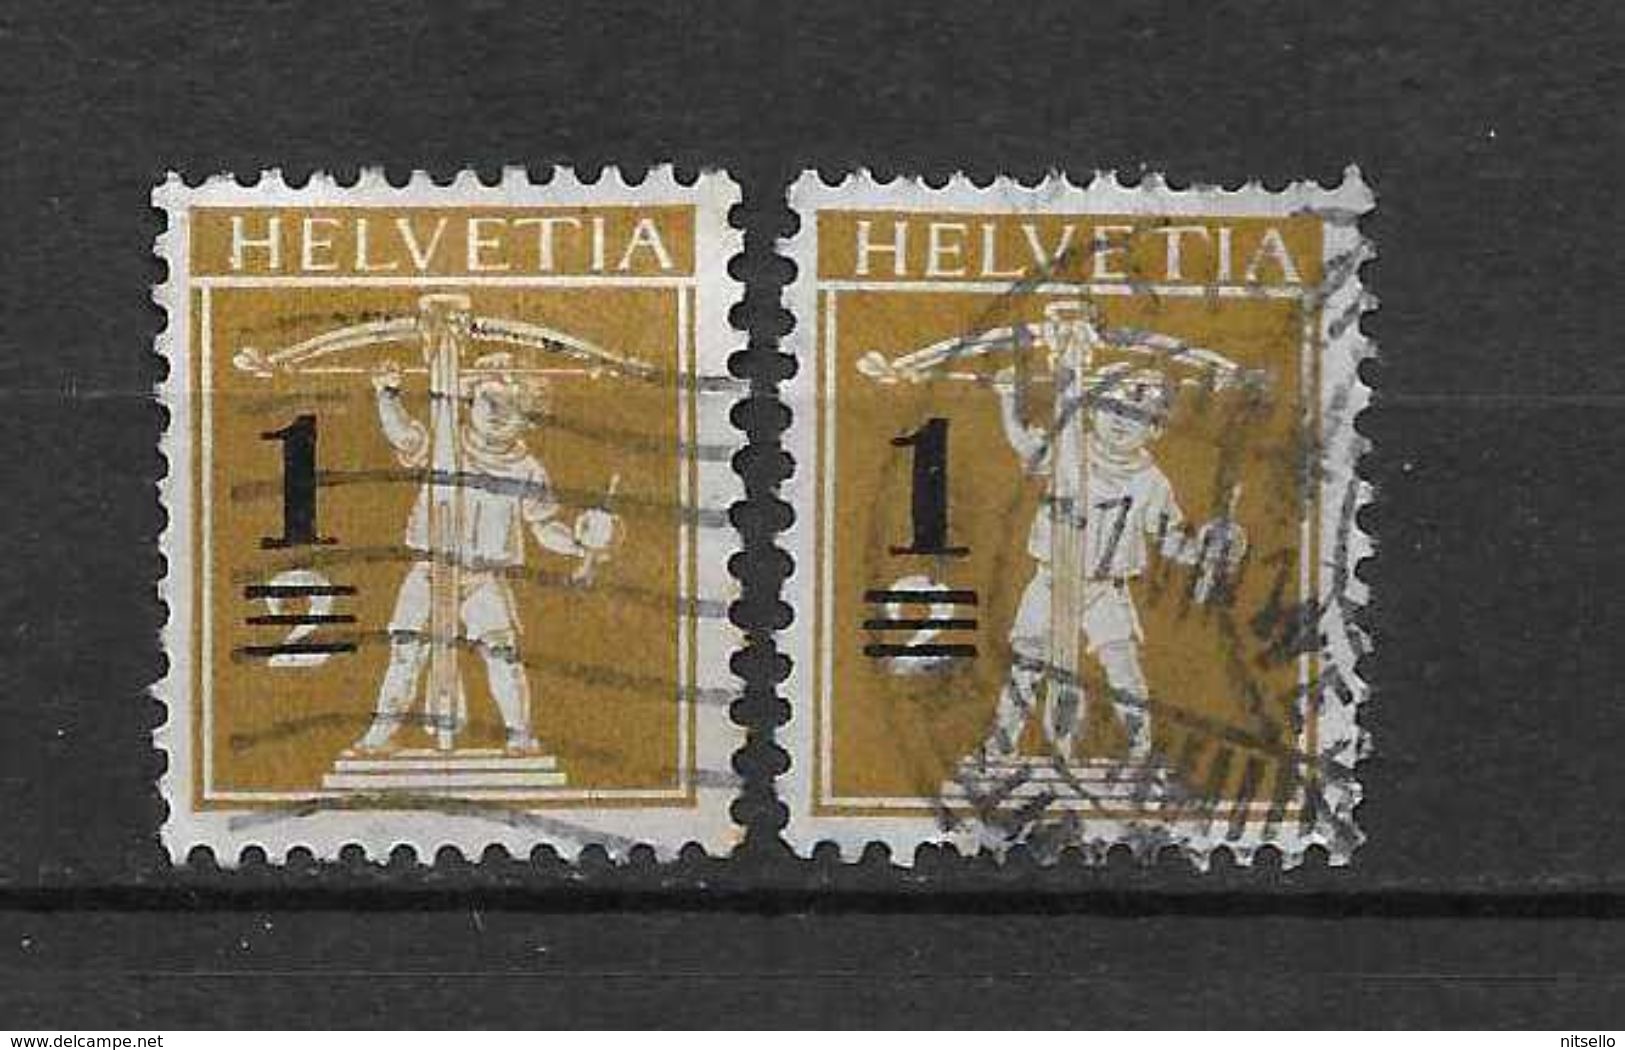 LOTE 1578  ///  SUIZA  1914     YVERT Nº: 145      ¡¡¡¡¡ LIQUIDATION !!!!!!! - Used Stamps